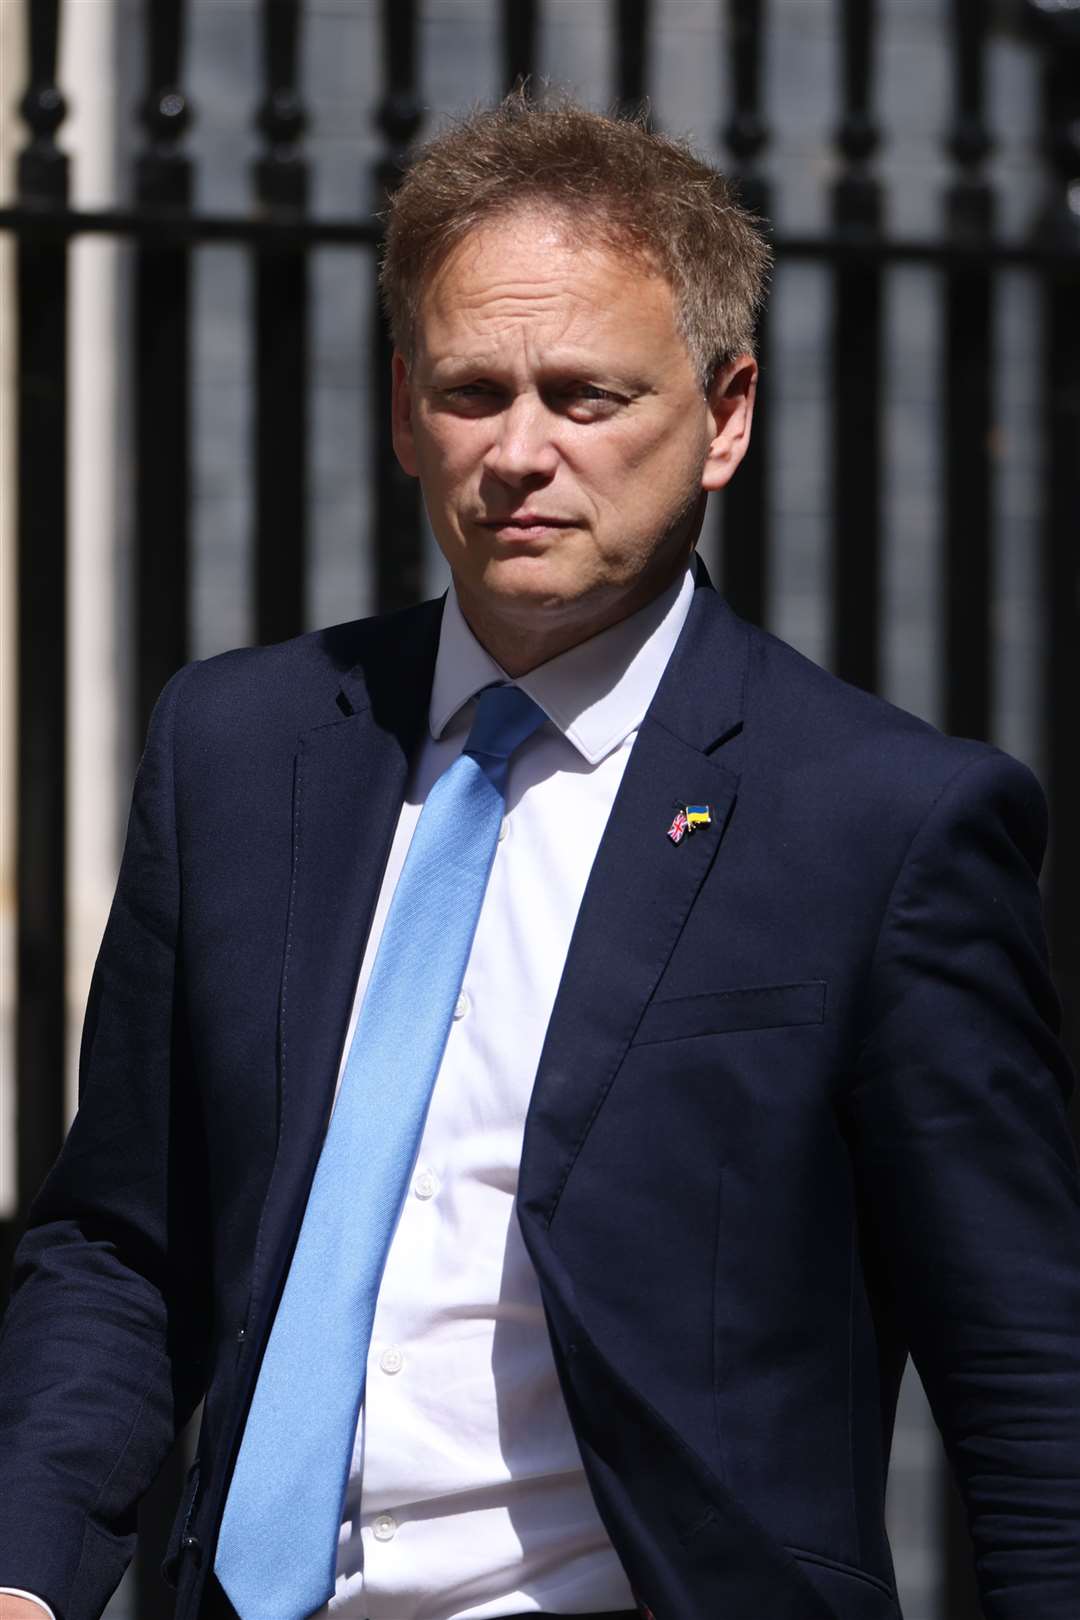 Grant Shapps says tackling the cost-of-living crisis is important (James Manning/PA)